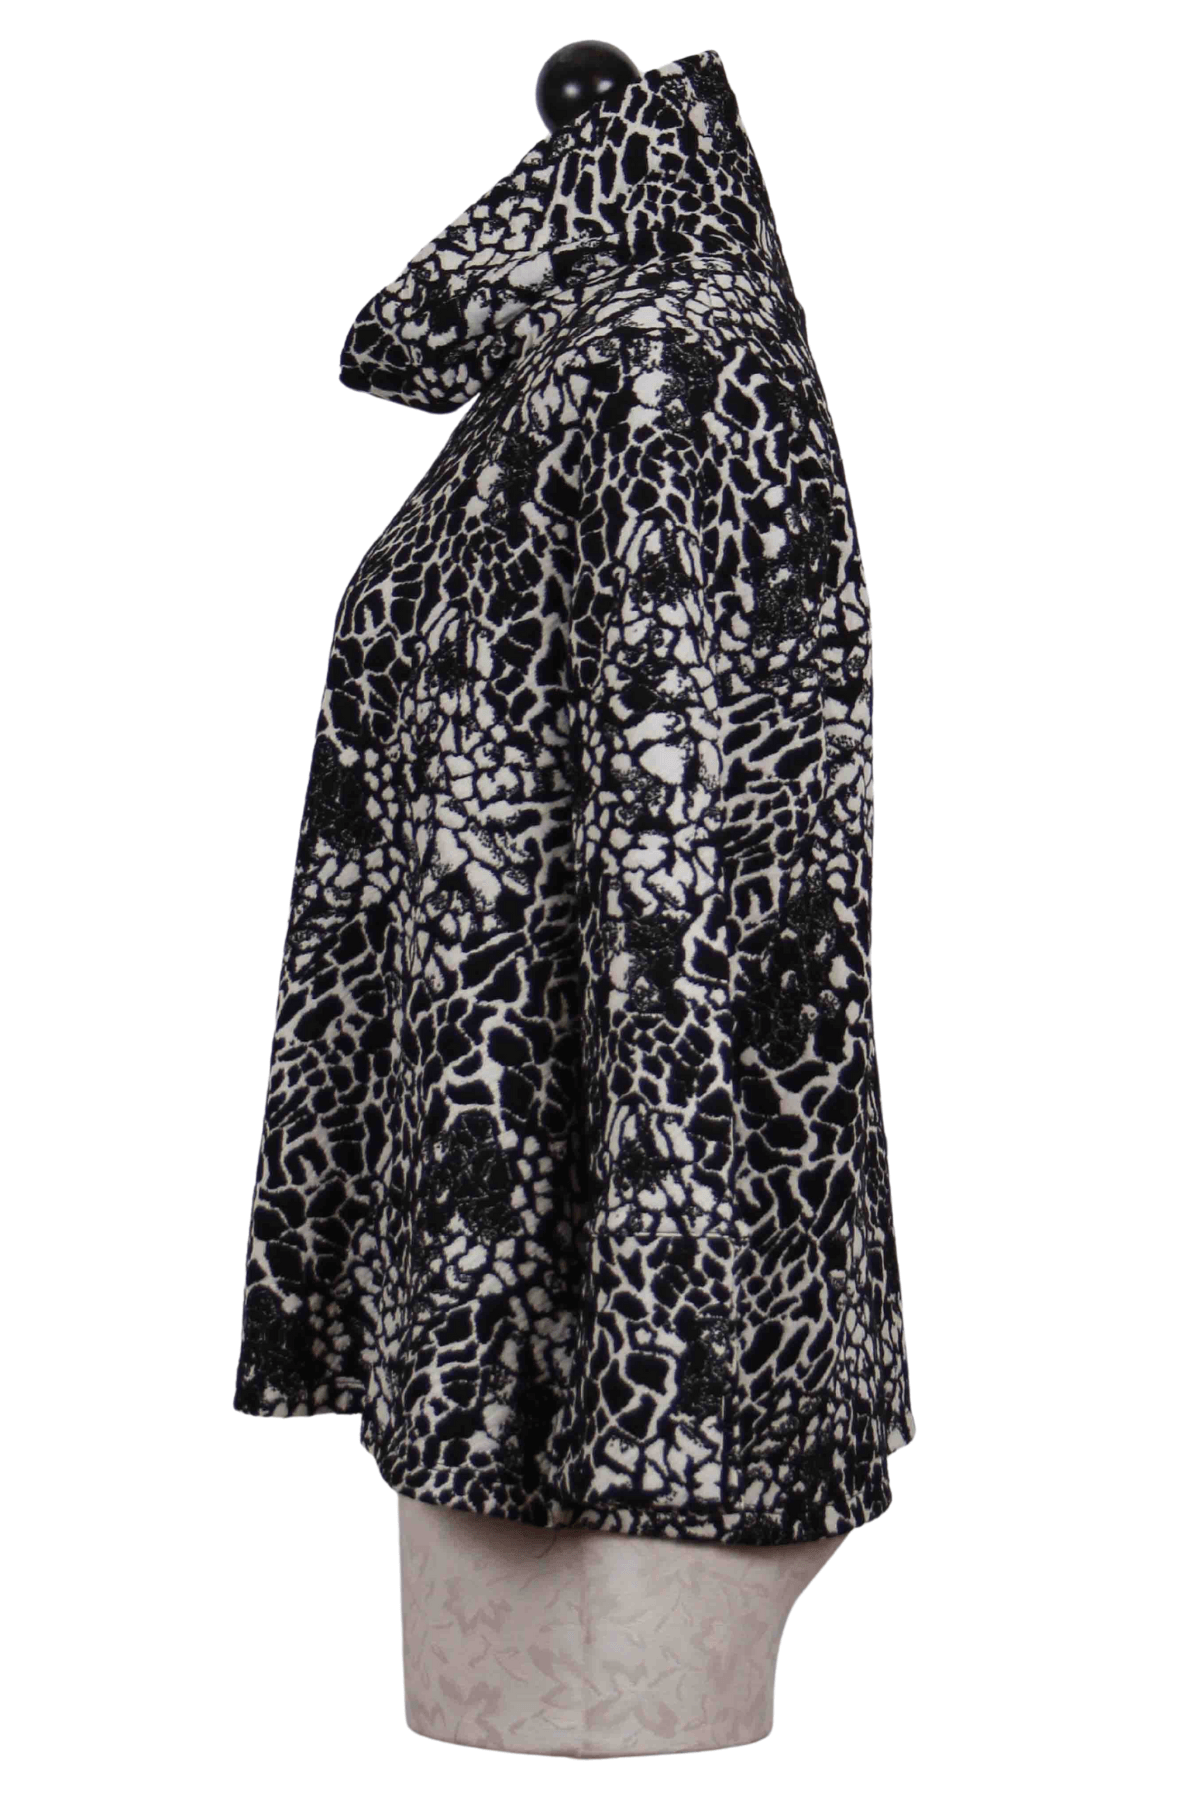 side view of Black and white Flora and Fauna Cowl Neck Top by Liv by Habitat